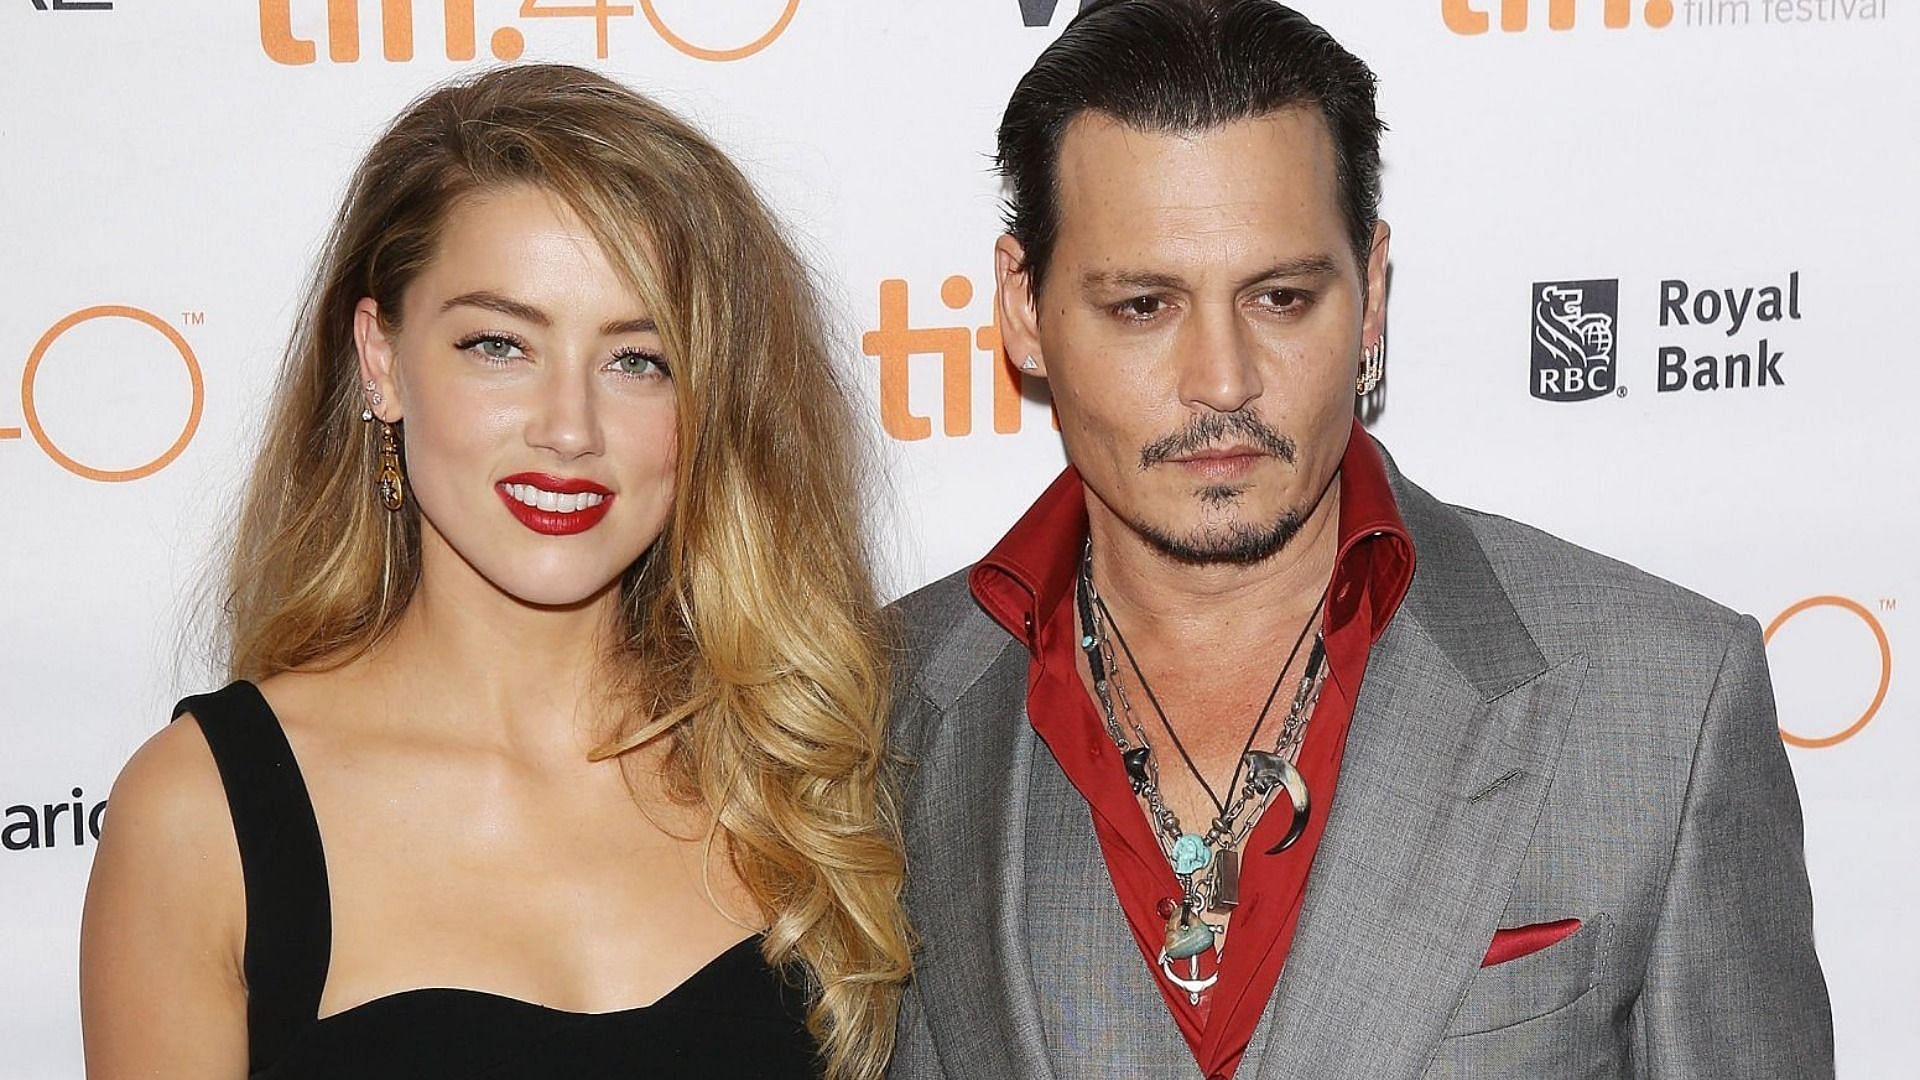 The resurfaced audio clip contained Heard&#039;s infamous &quot;domestic violence&quot; message made towards Johnny Depp (Image via Getty Images)